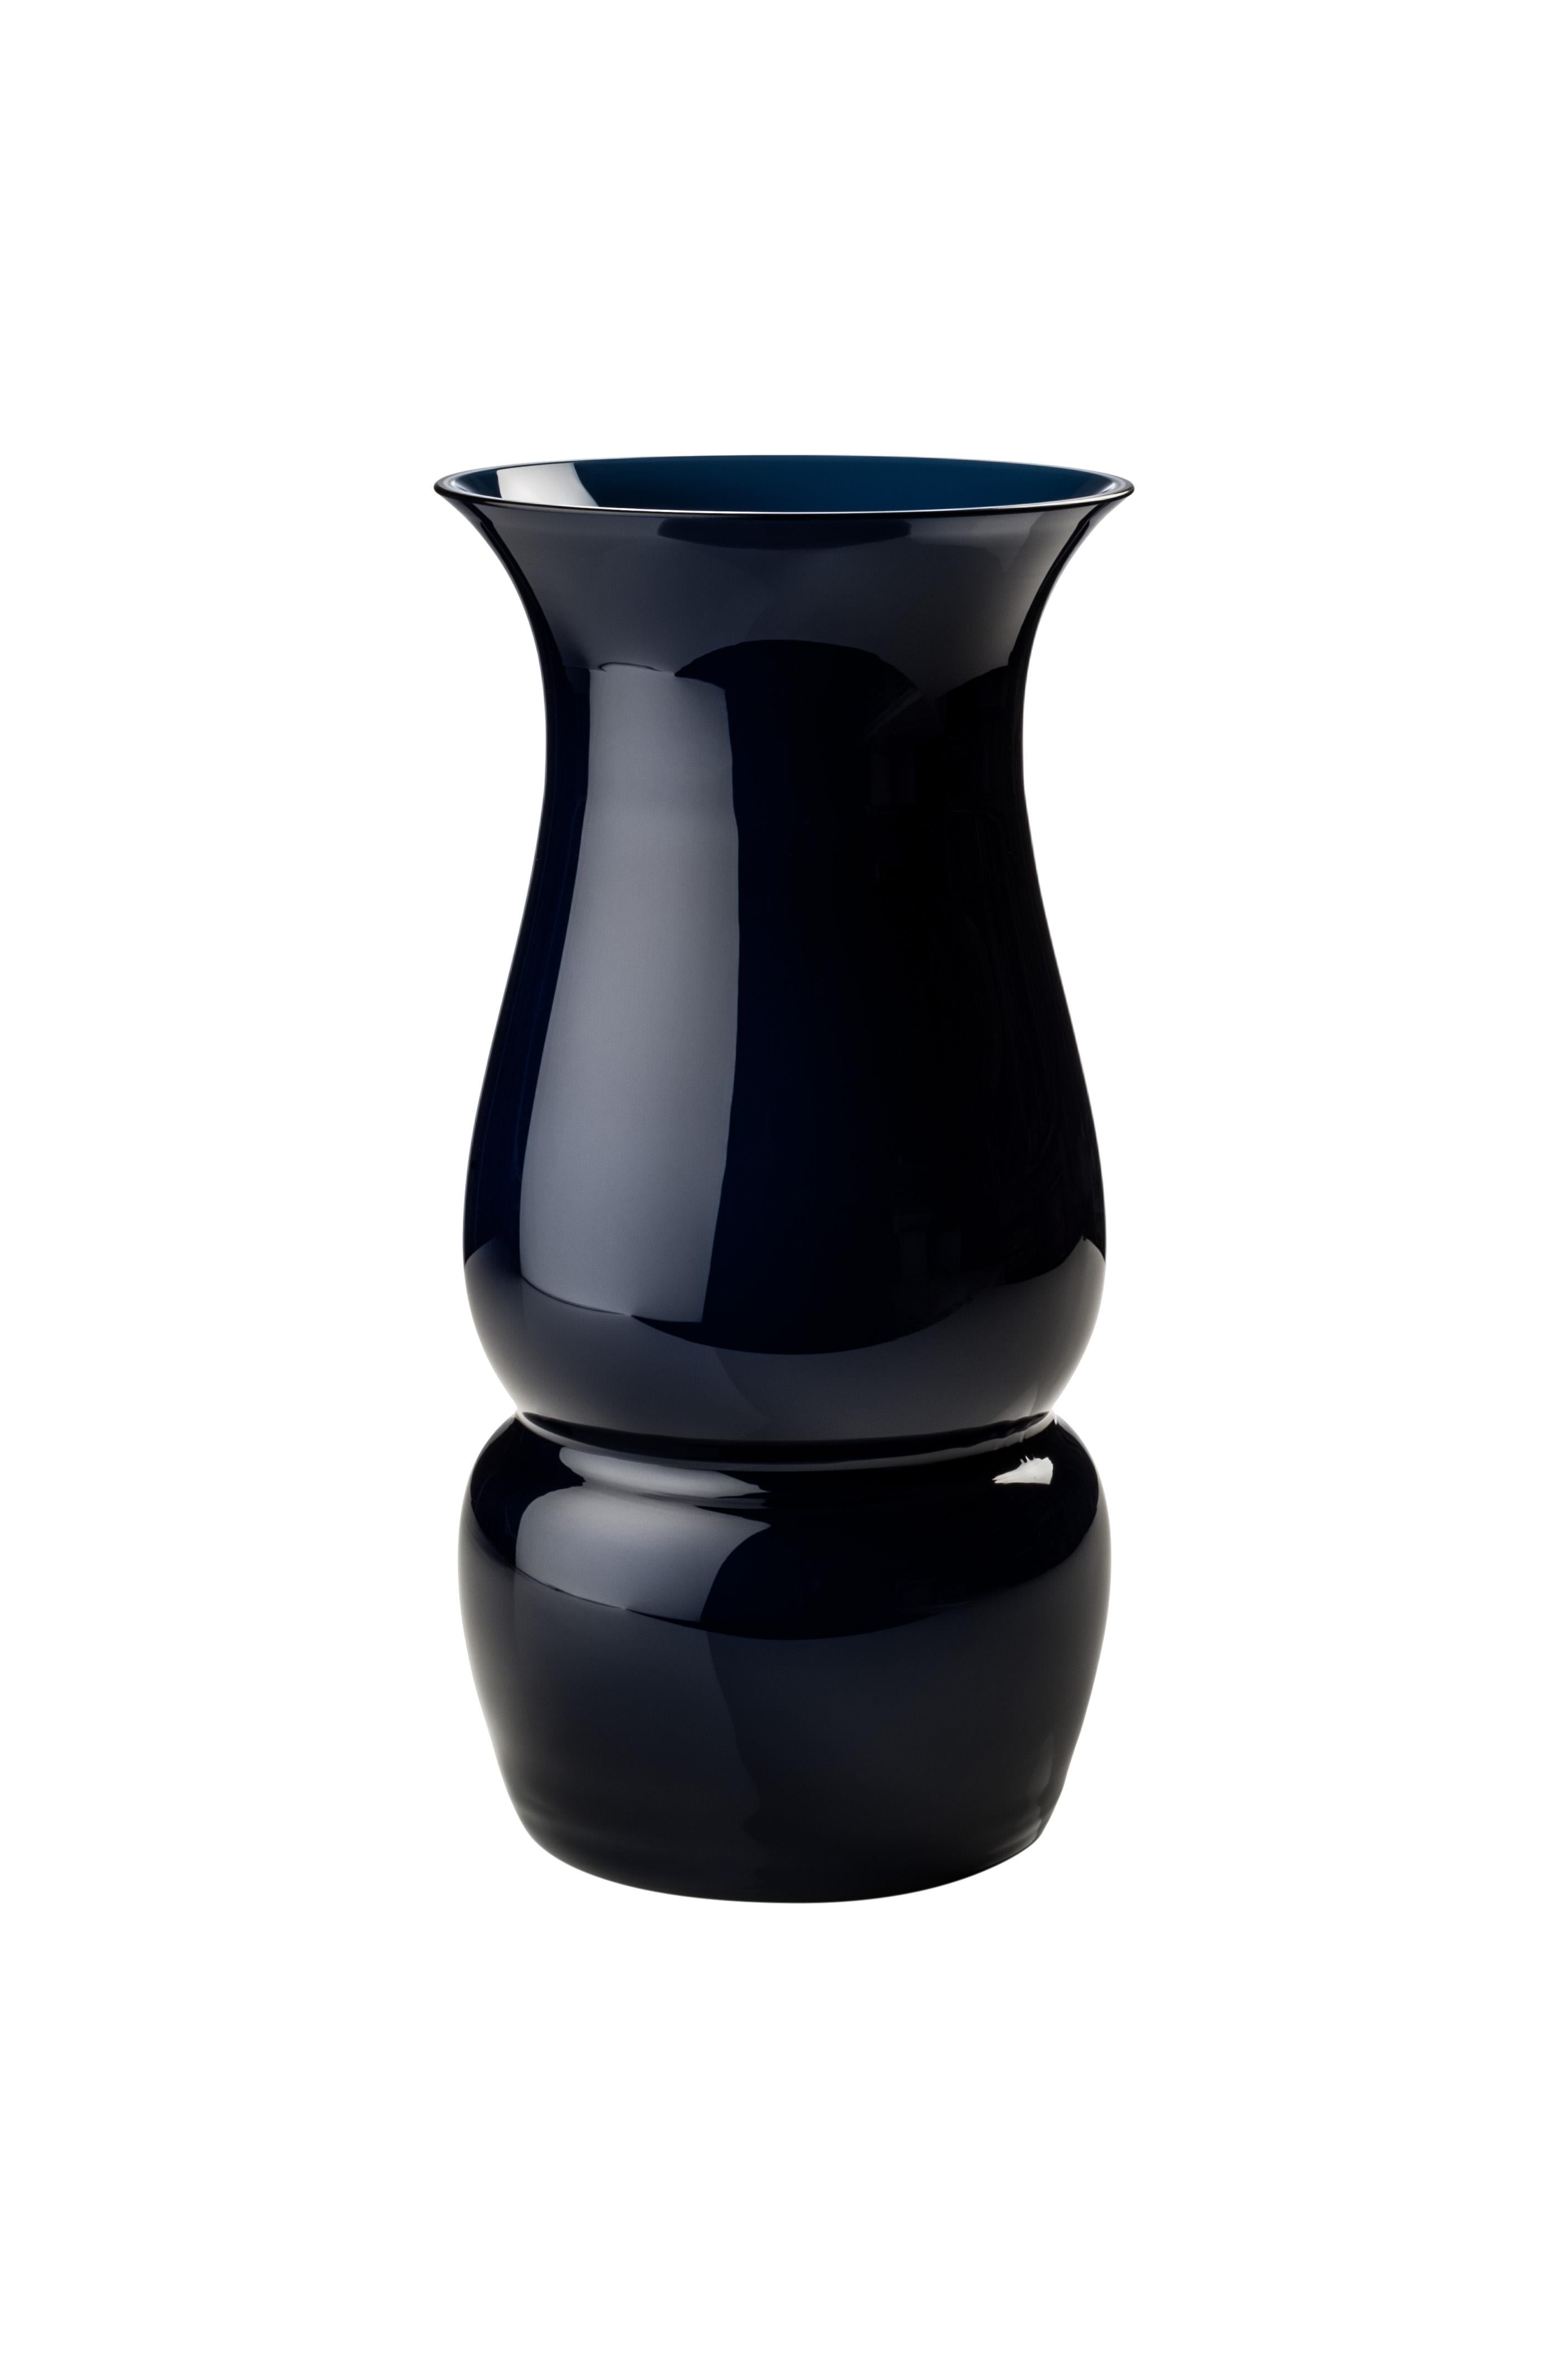 Venini glass vase with elongated body and funnel shaped neck in marine blue designed by Leonardo Lanucci in 2016. Perfect for indoor home decor as container or strong statement piece for any room. Also available in other colors on